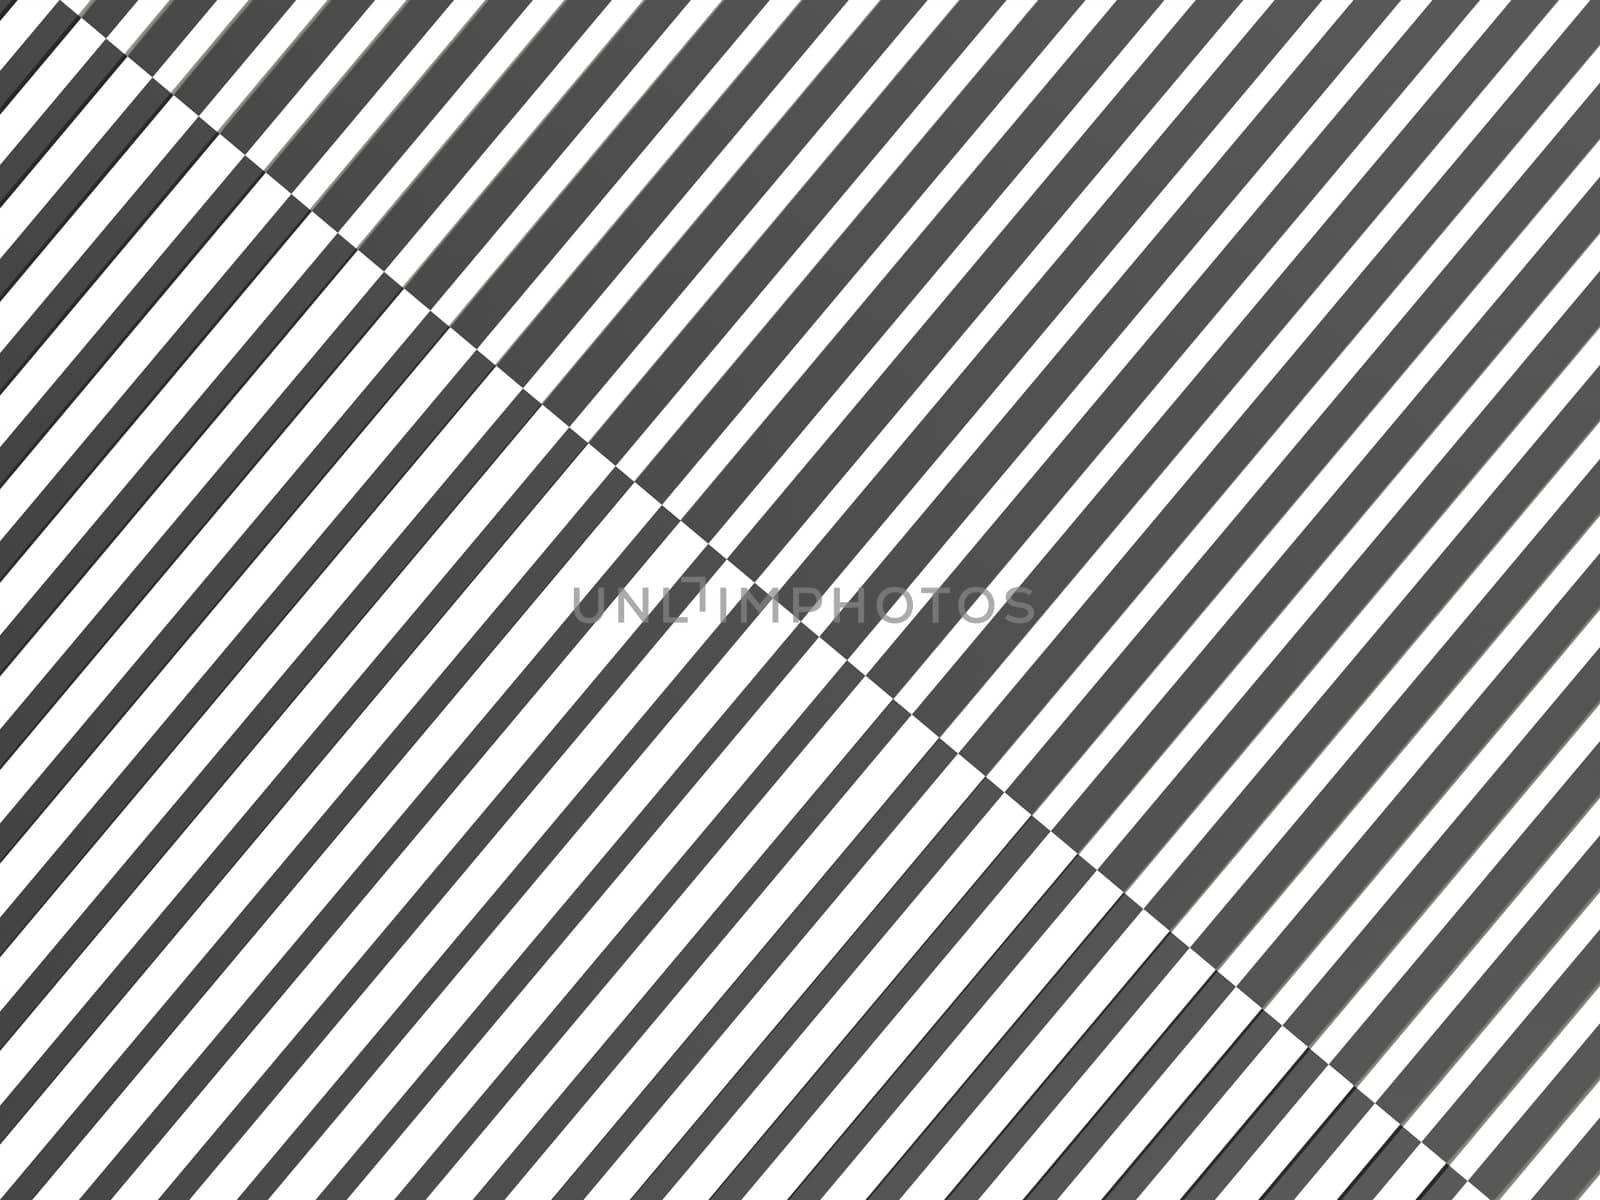 Black white line image with hi-res rendered artwork that could be used for any graphic design.